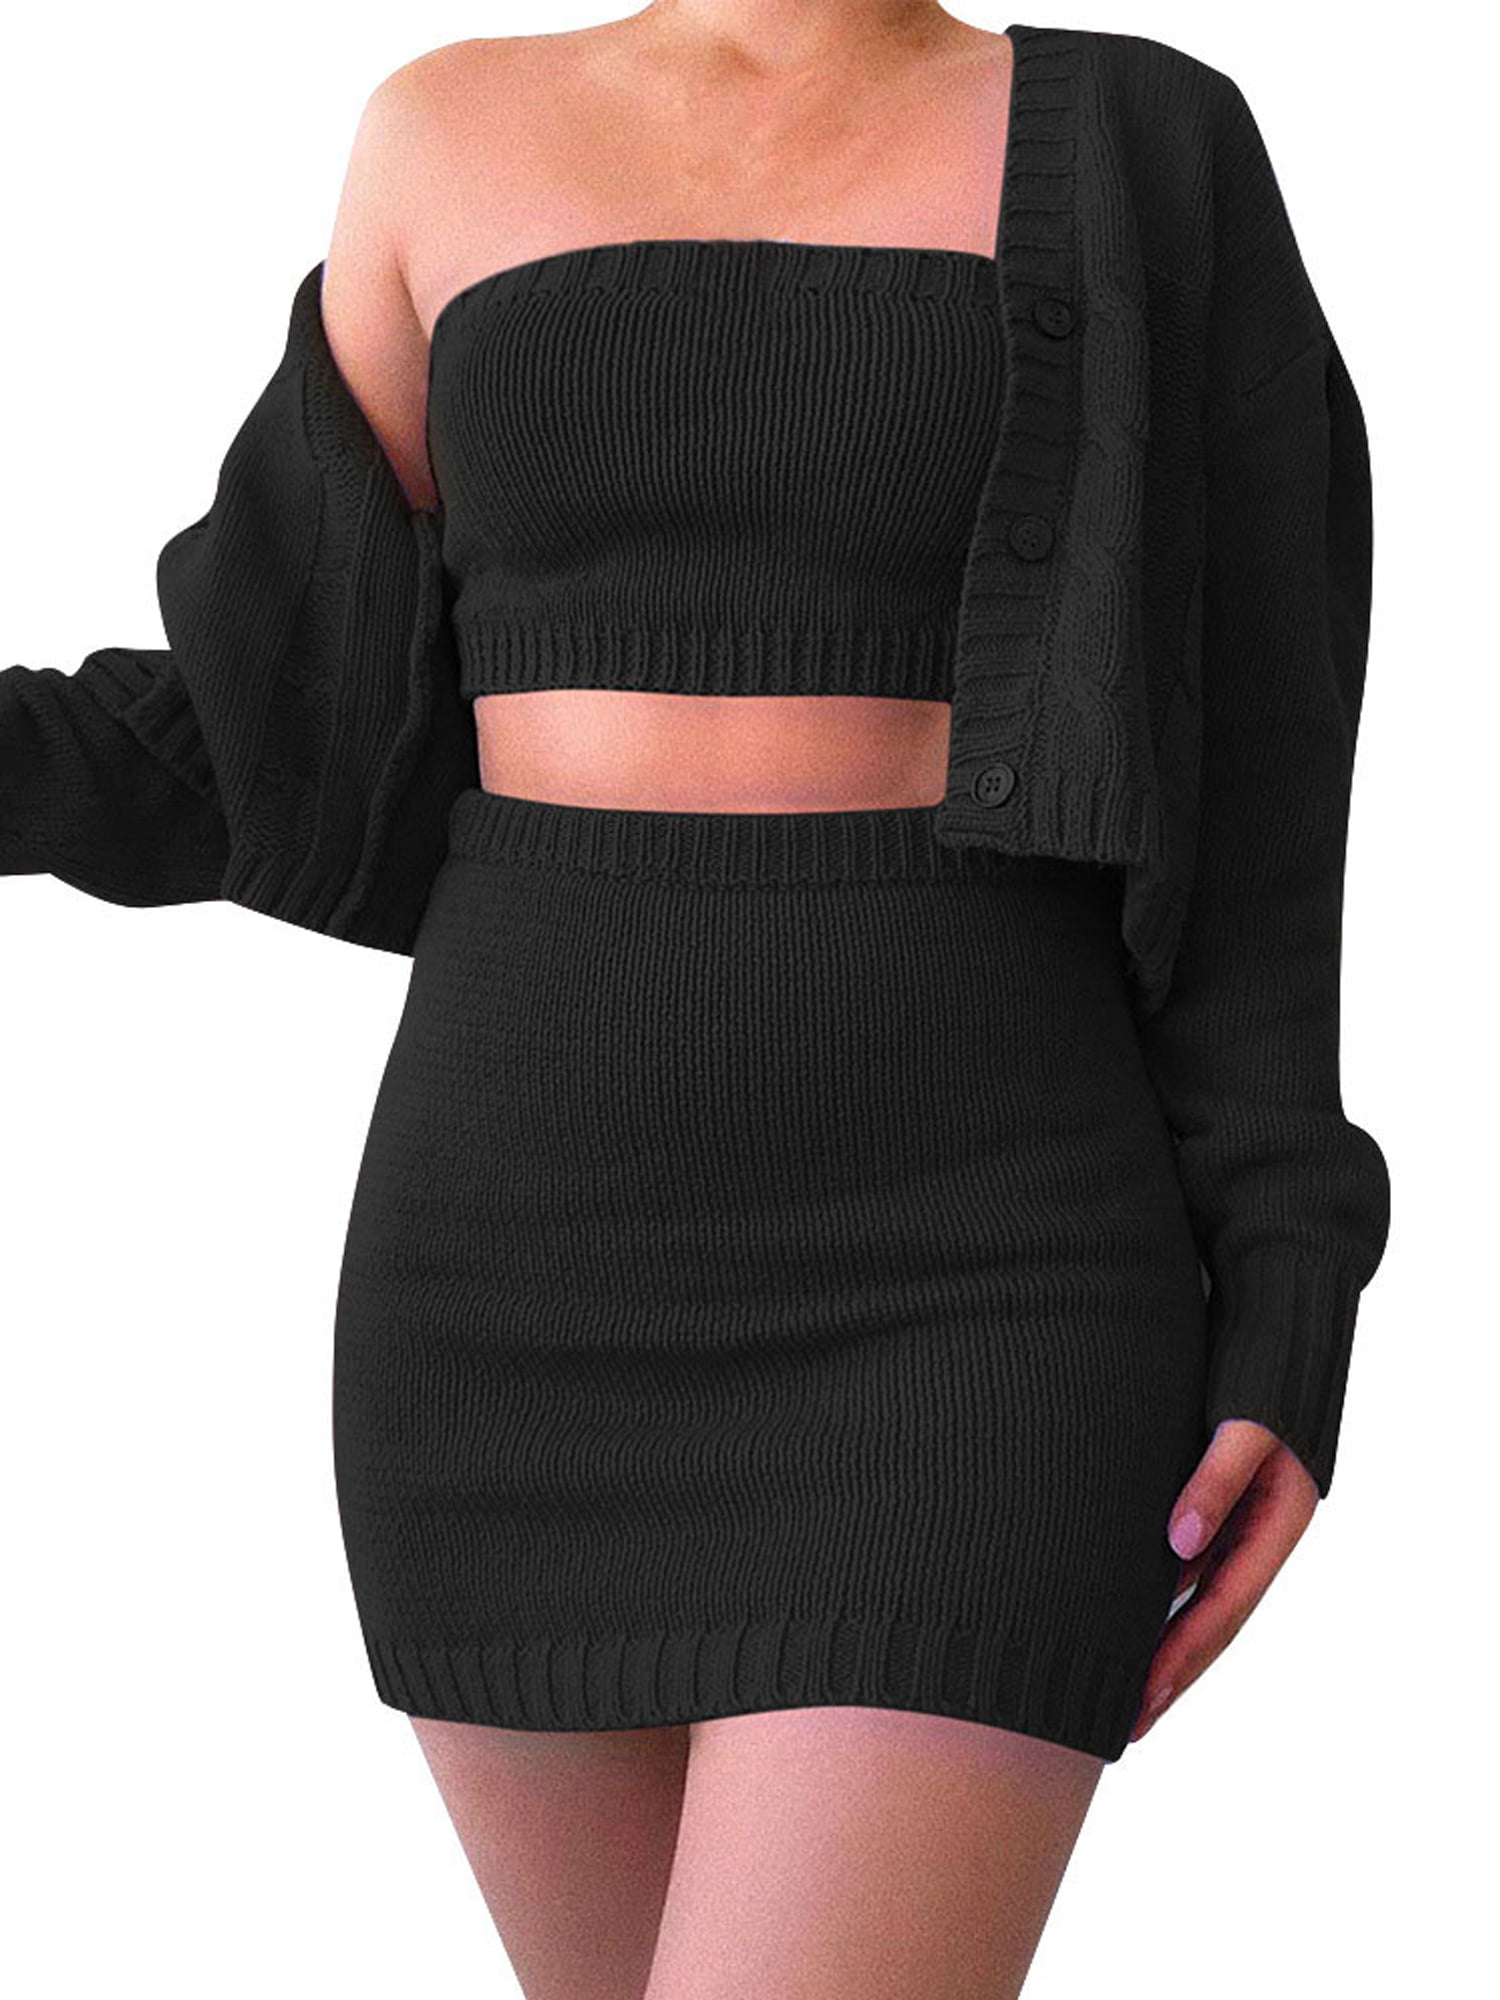 WOMEN FASHION Jumpers & Sweatshirts Knitted Black L discount 71% Nice Things cardigan 